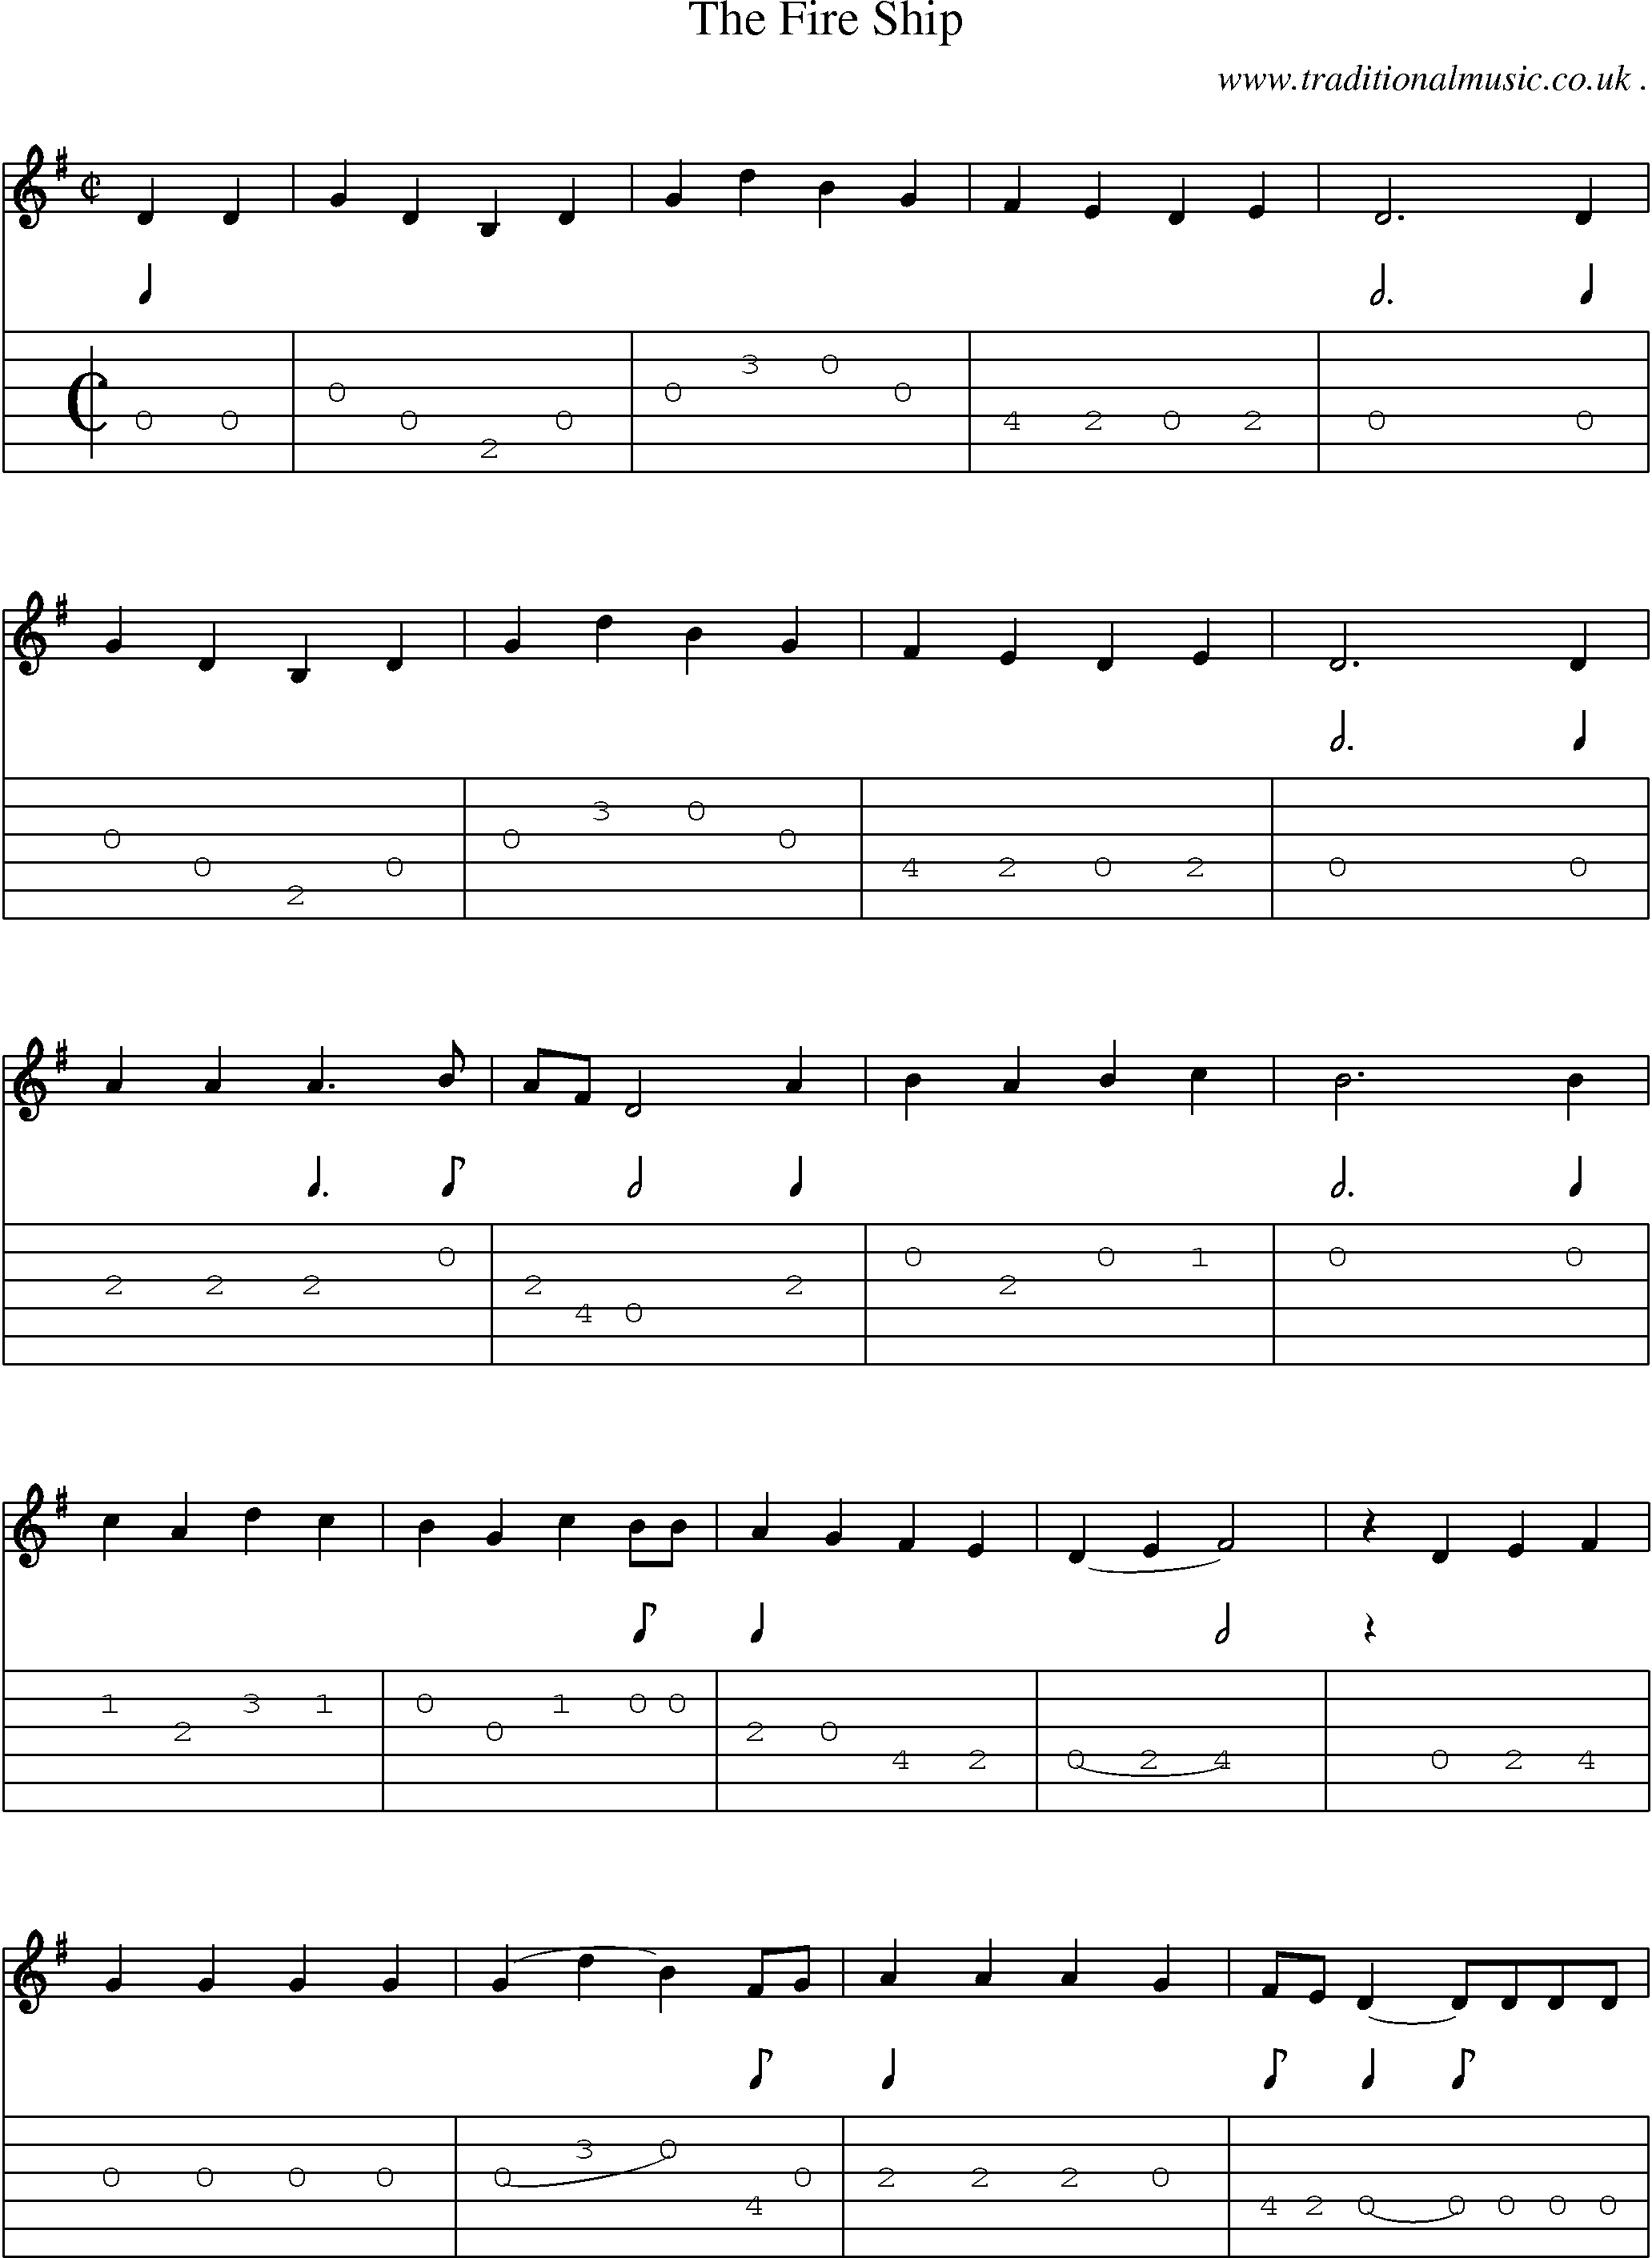 Sheet-Music and Guitar Tabs for The Fire Ship